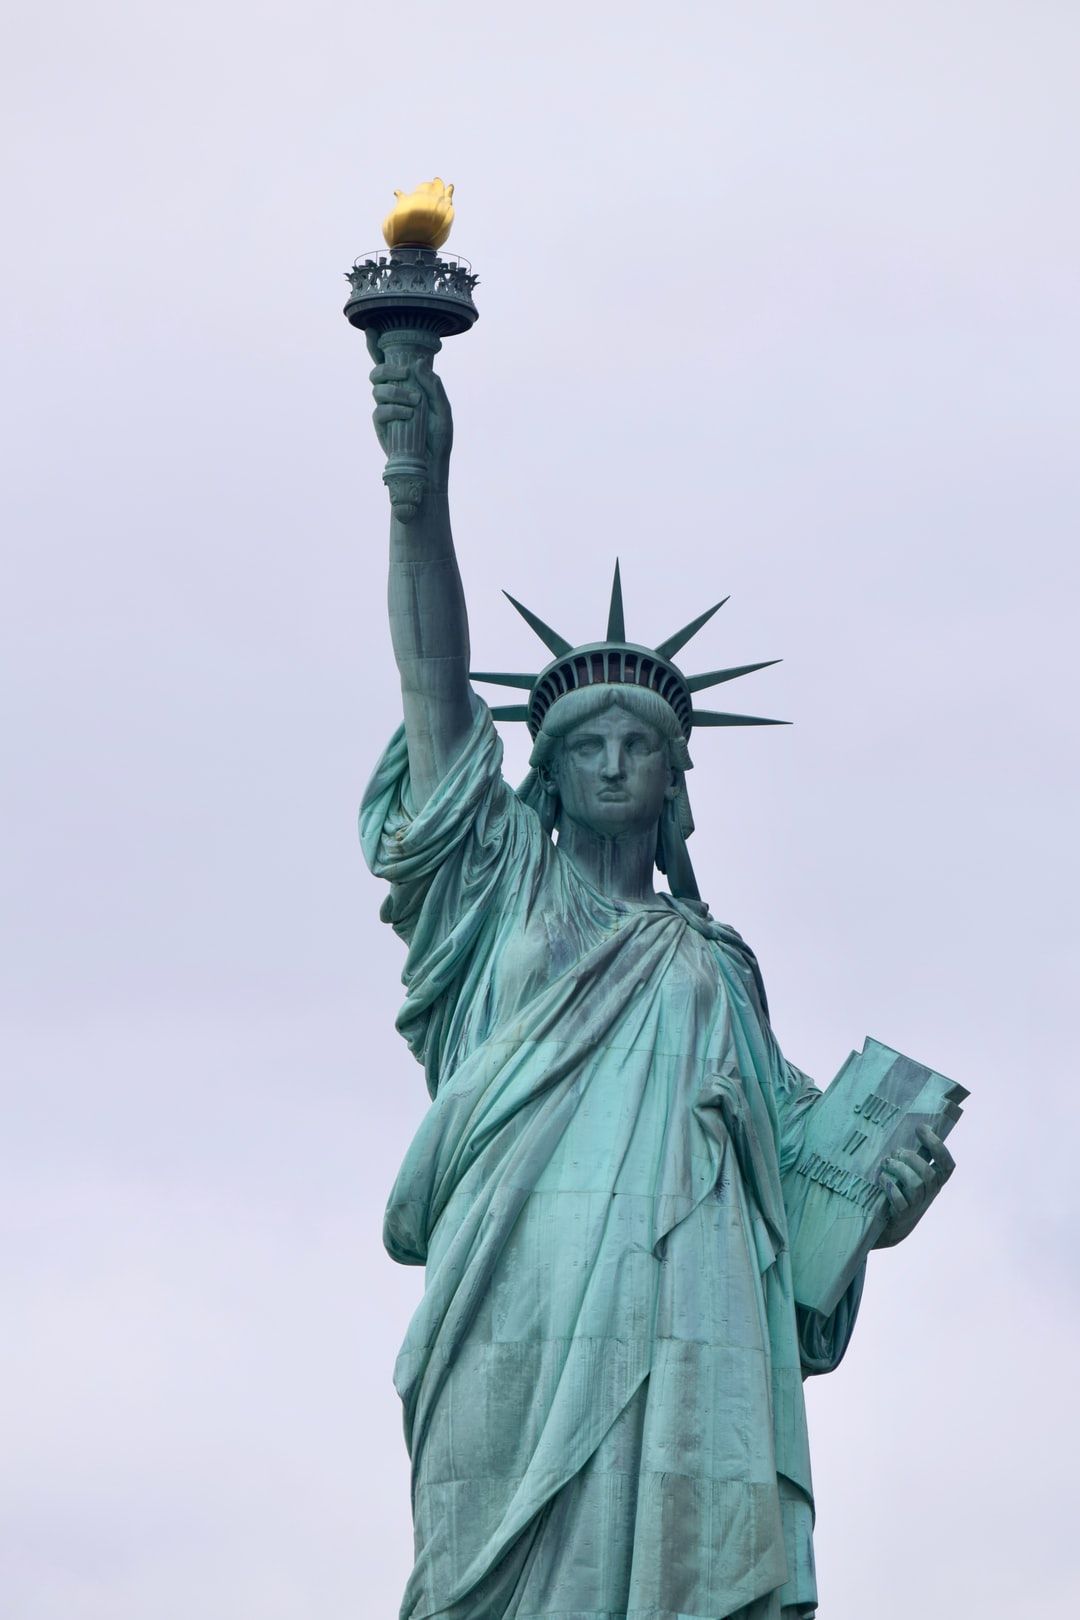 Statue Of Liberty Picture. Download Free Image